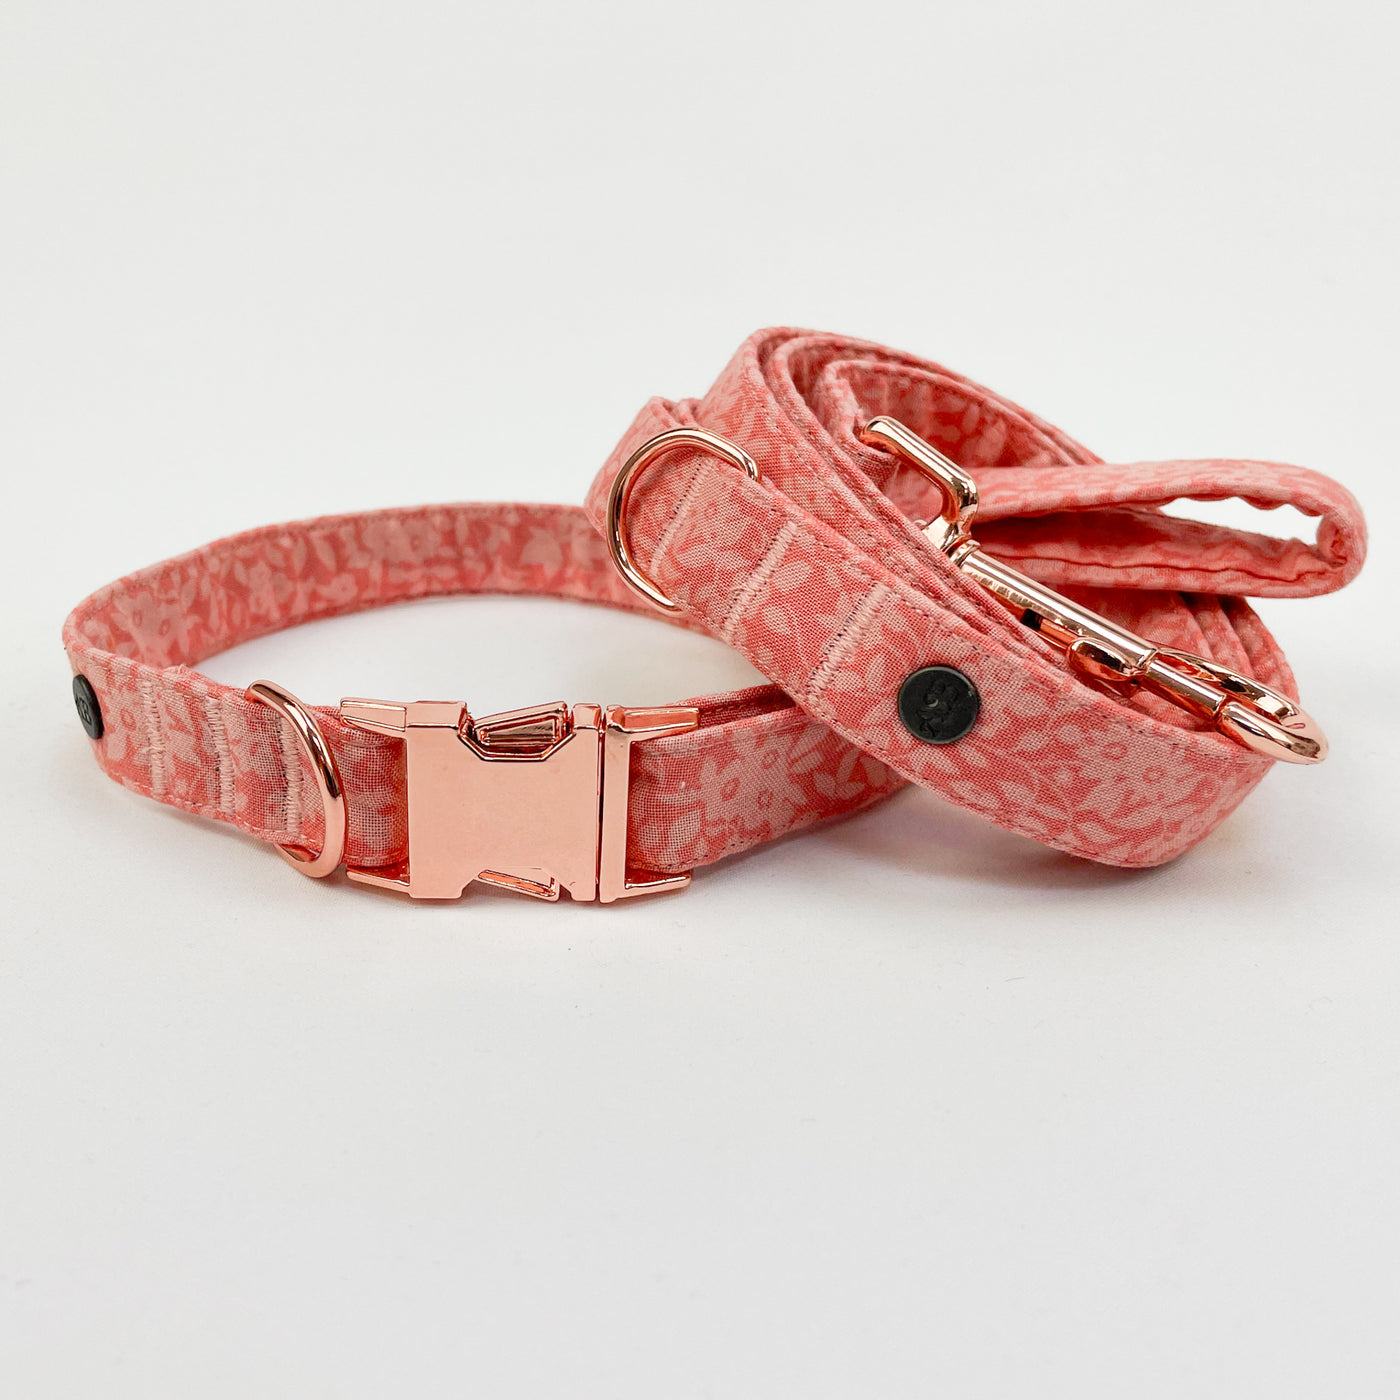 Dog collar and lead in a Liberty Peach Floral  design with rose gold hardware.